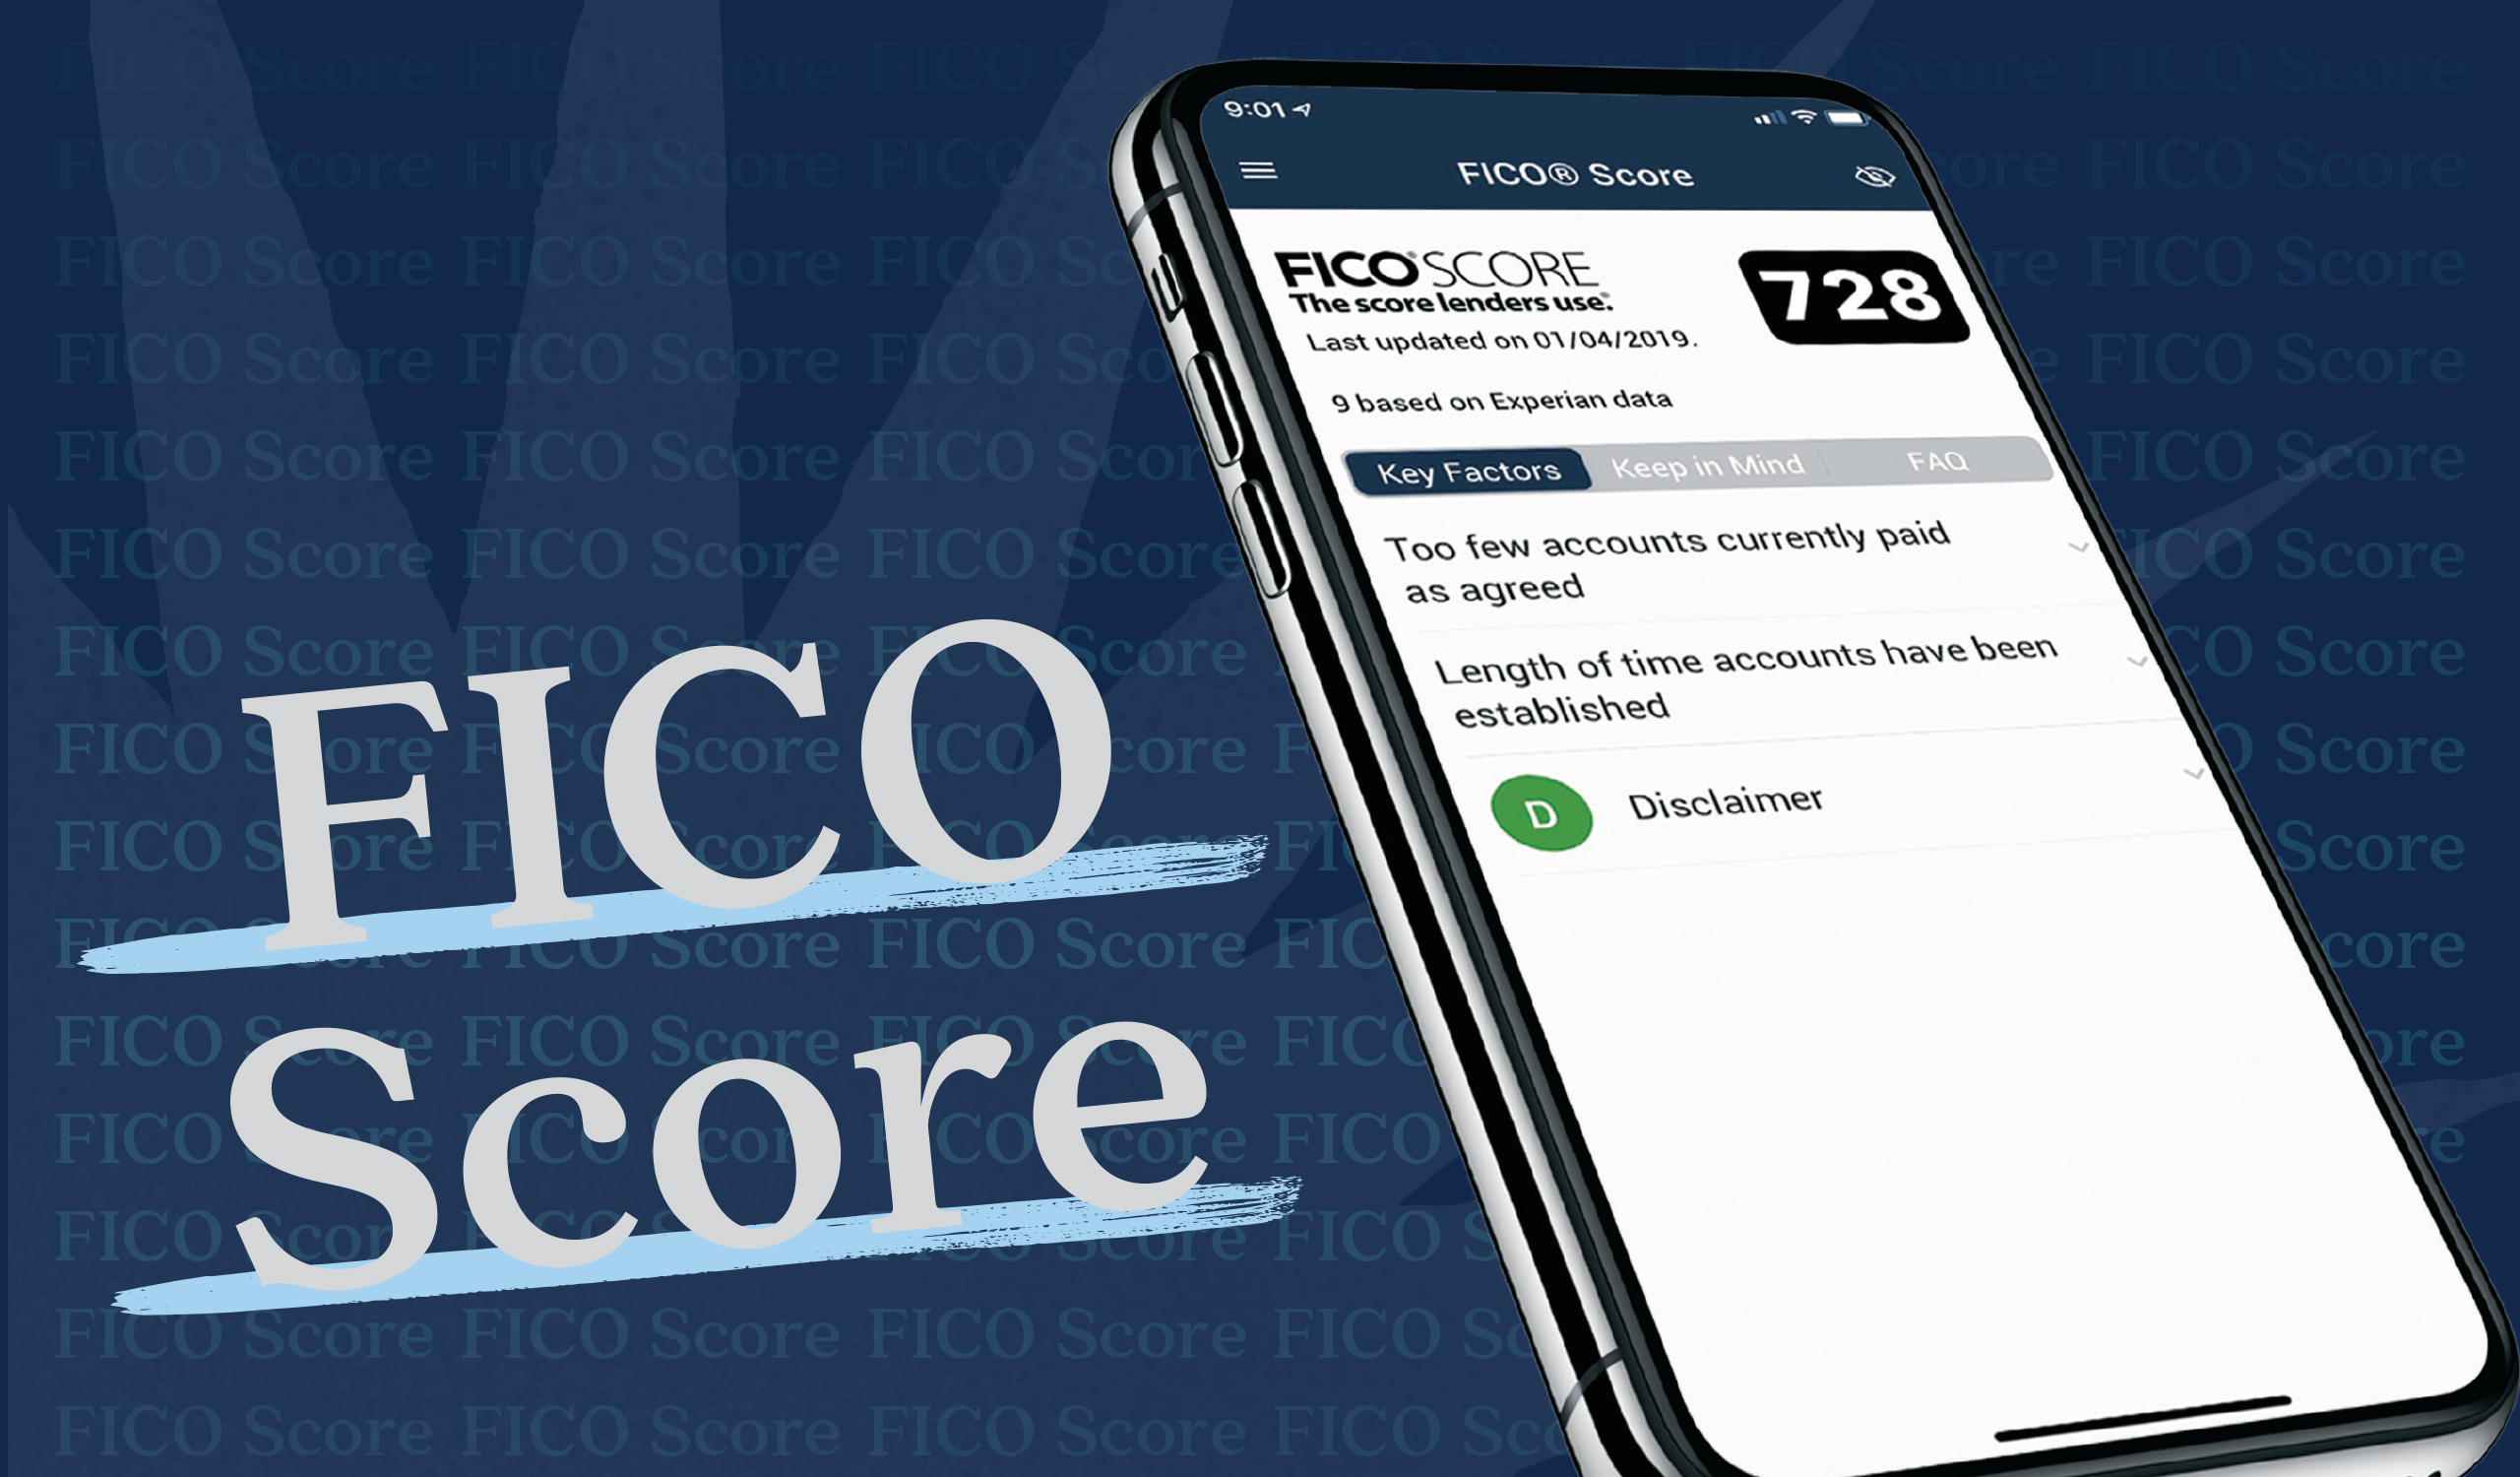 Knowing your FICO Score